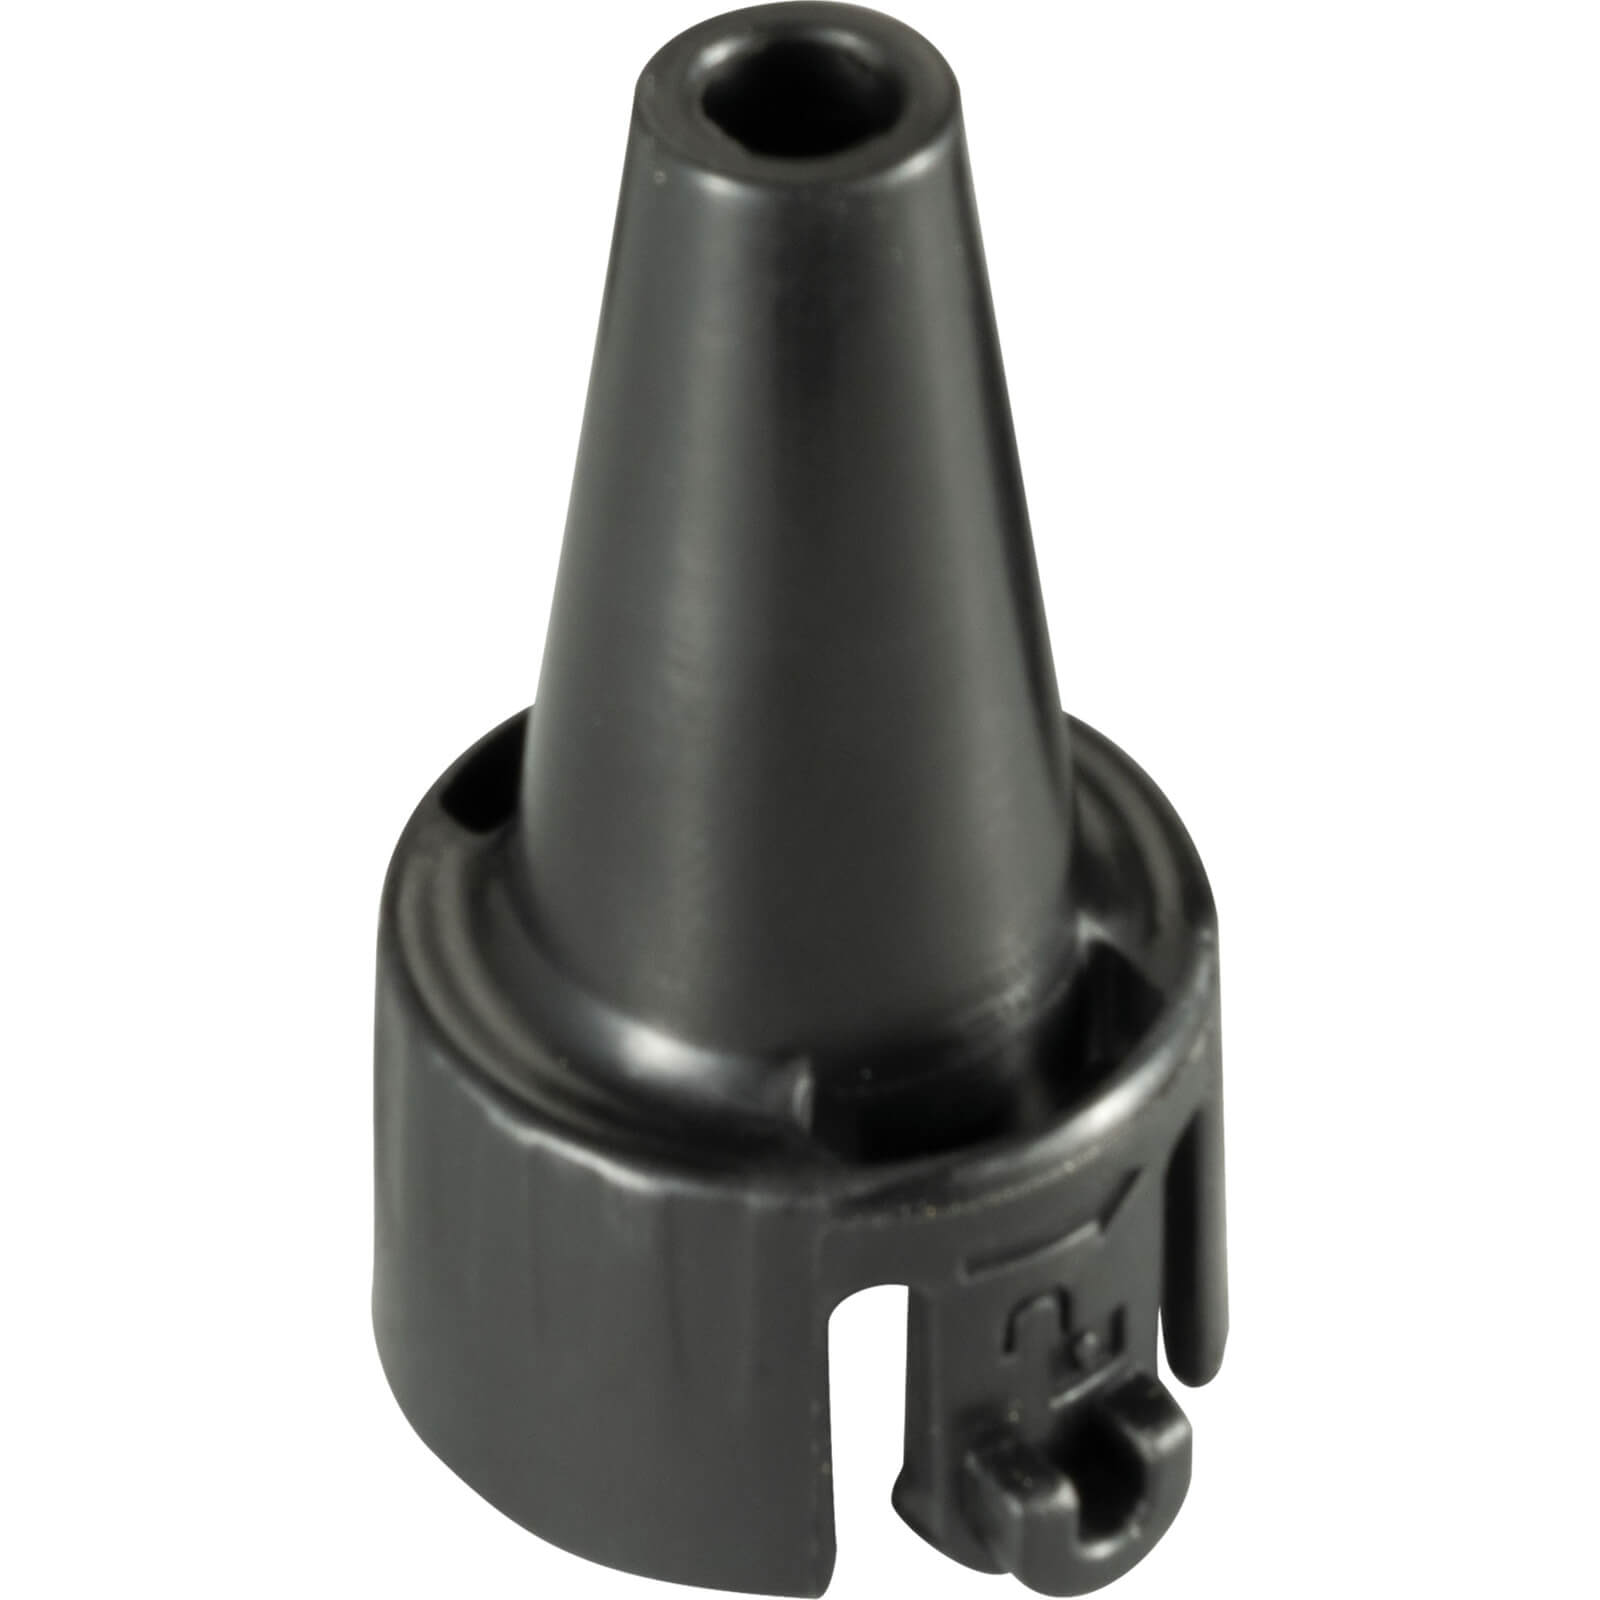 Makita Nozzle 7 for AS001G Dust Blower